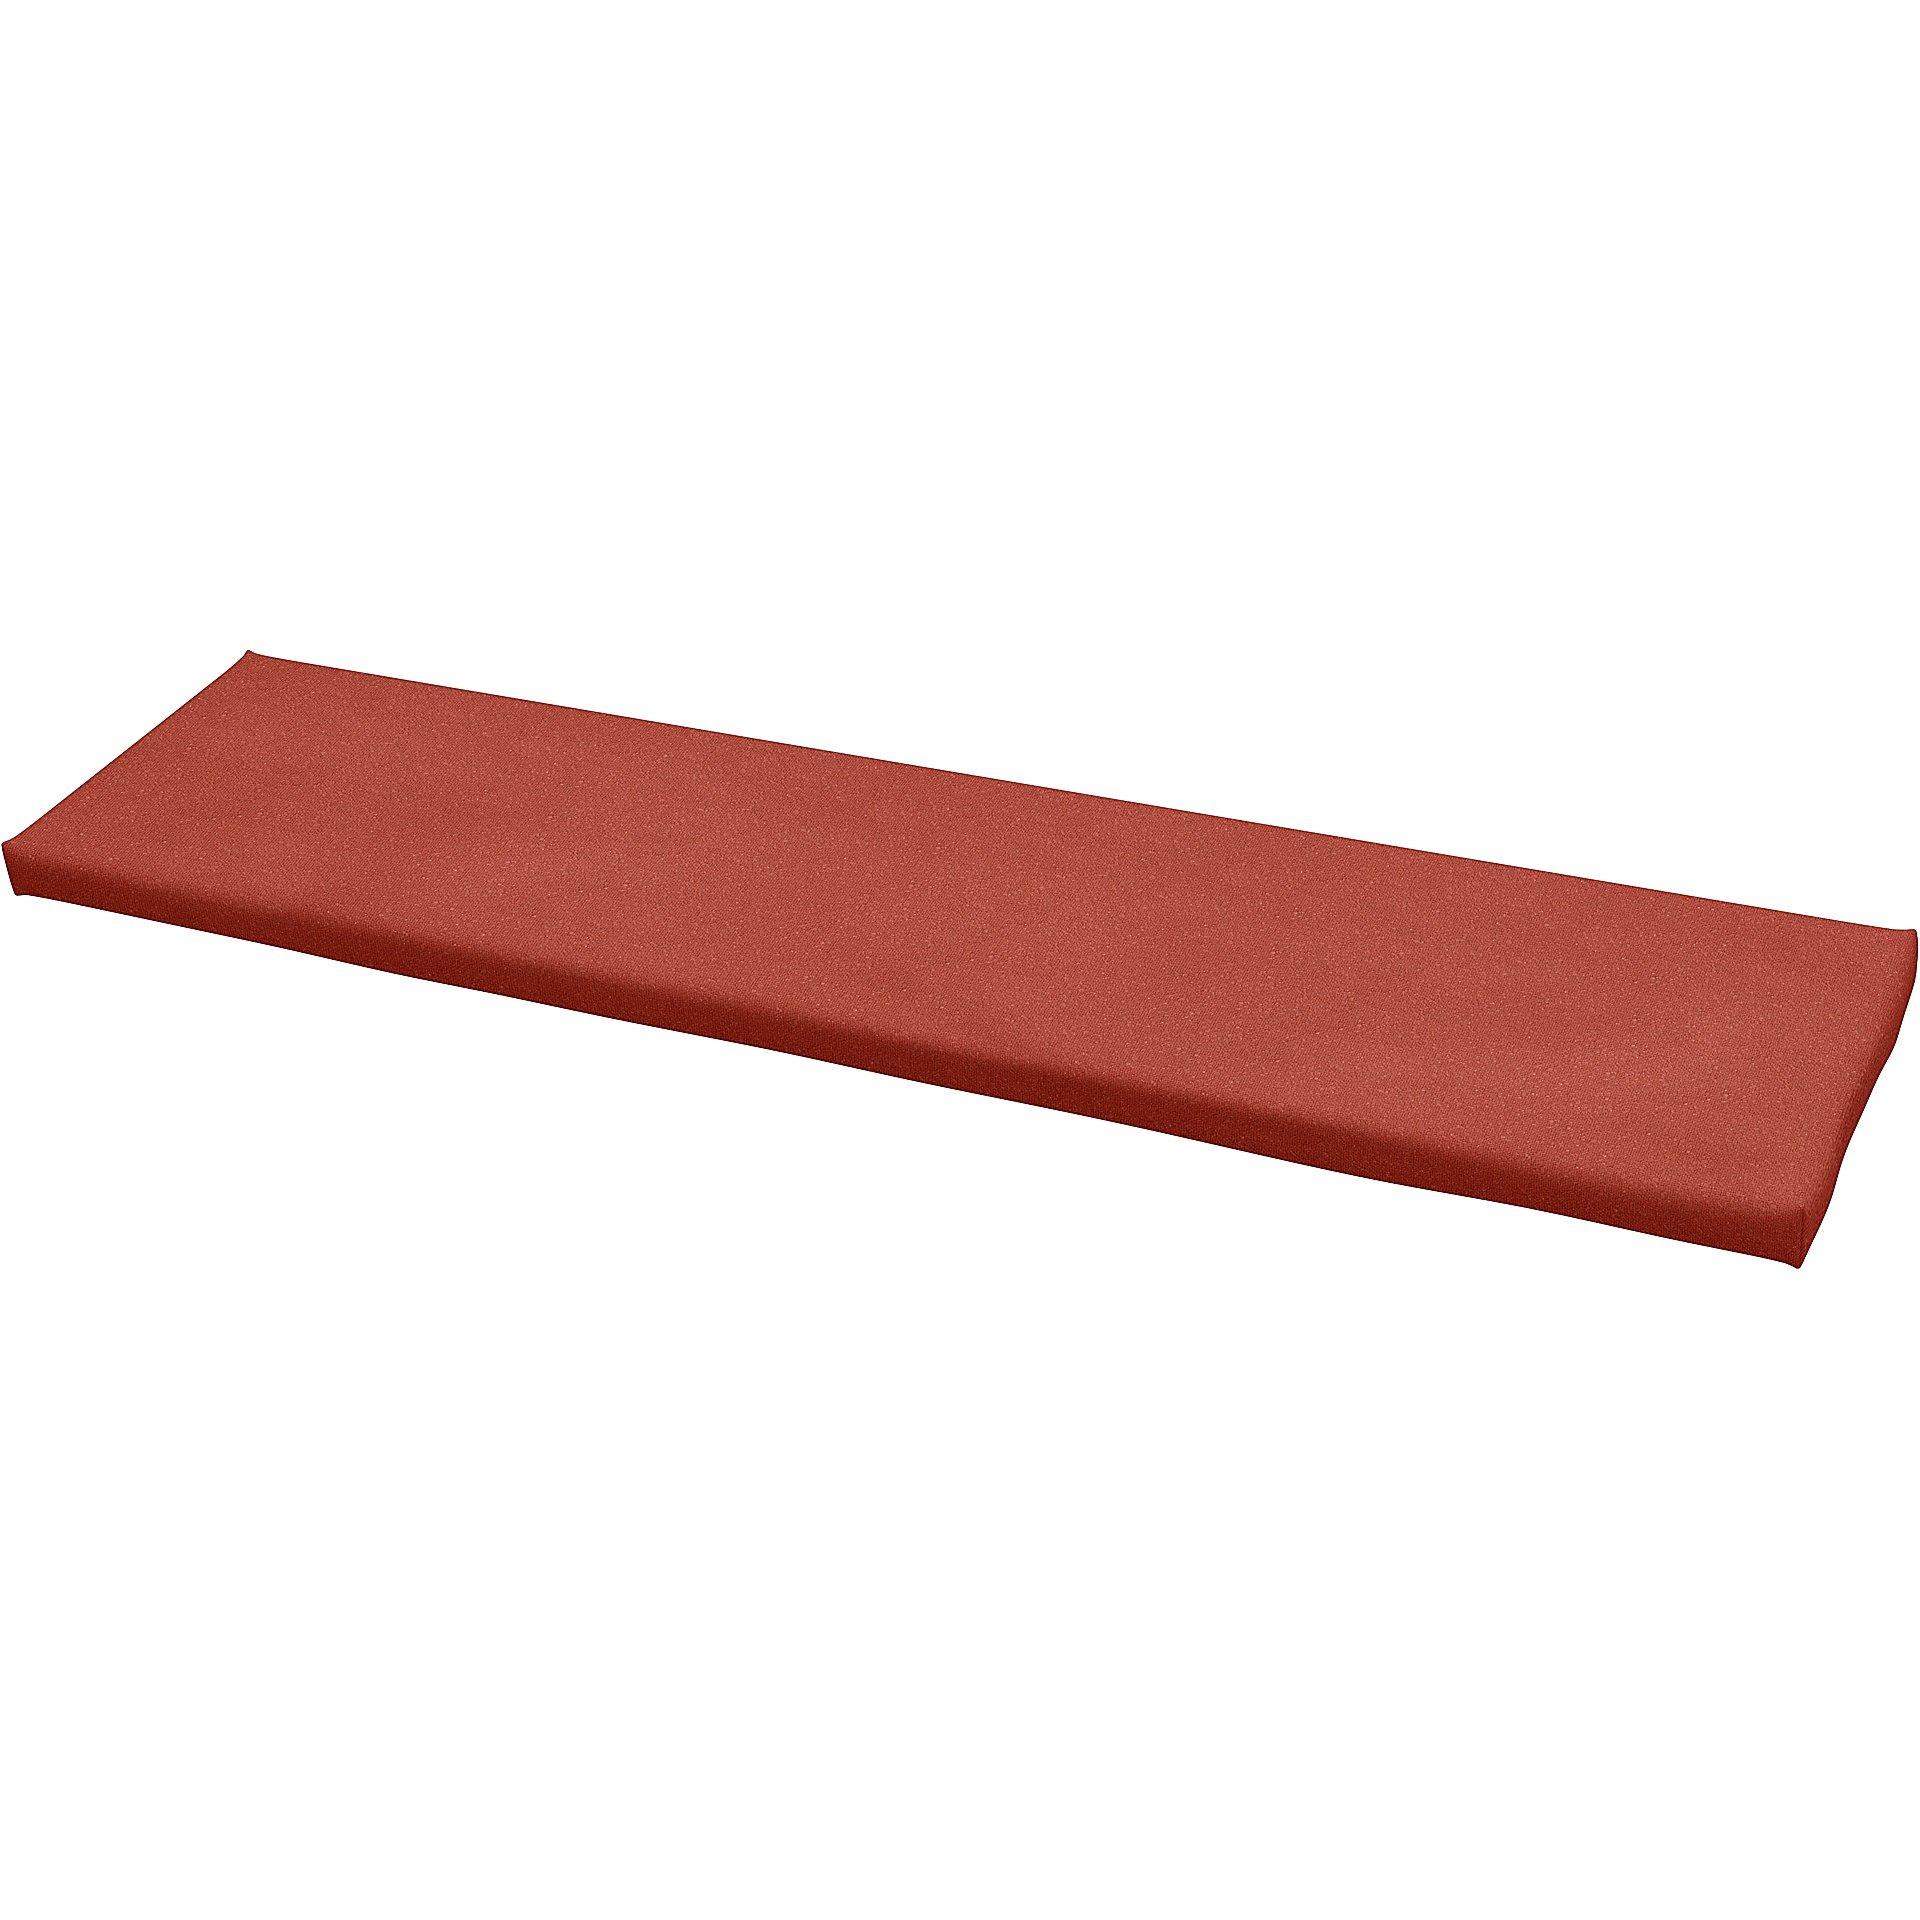 IKEA - Universal bench cushion cover 140x35x3,5 cm, Coral Red, Outdoor - Bemz